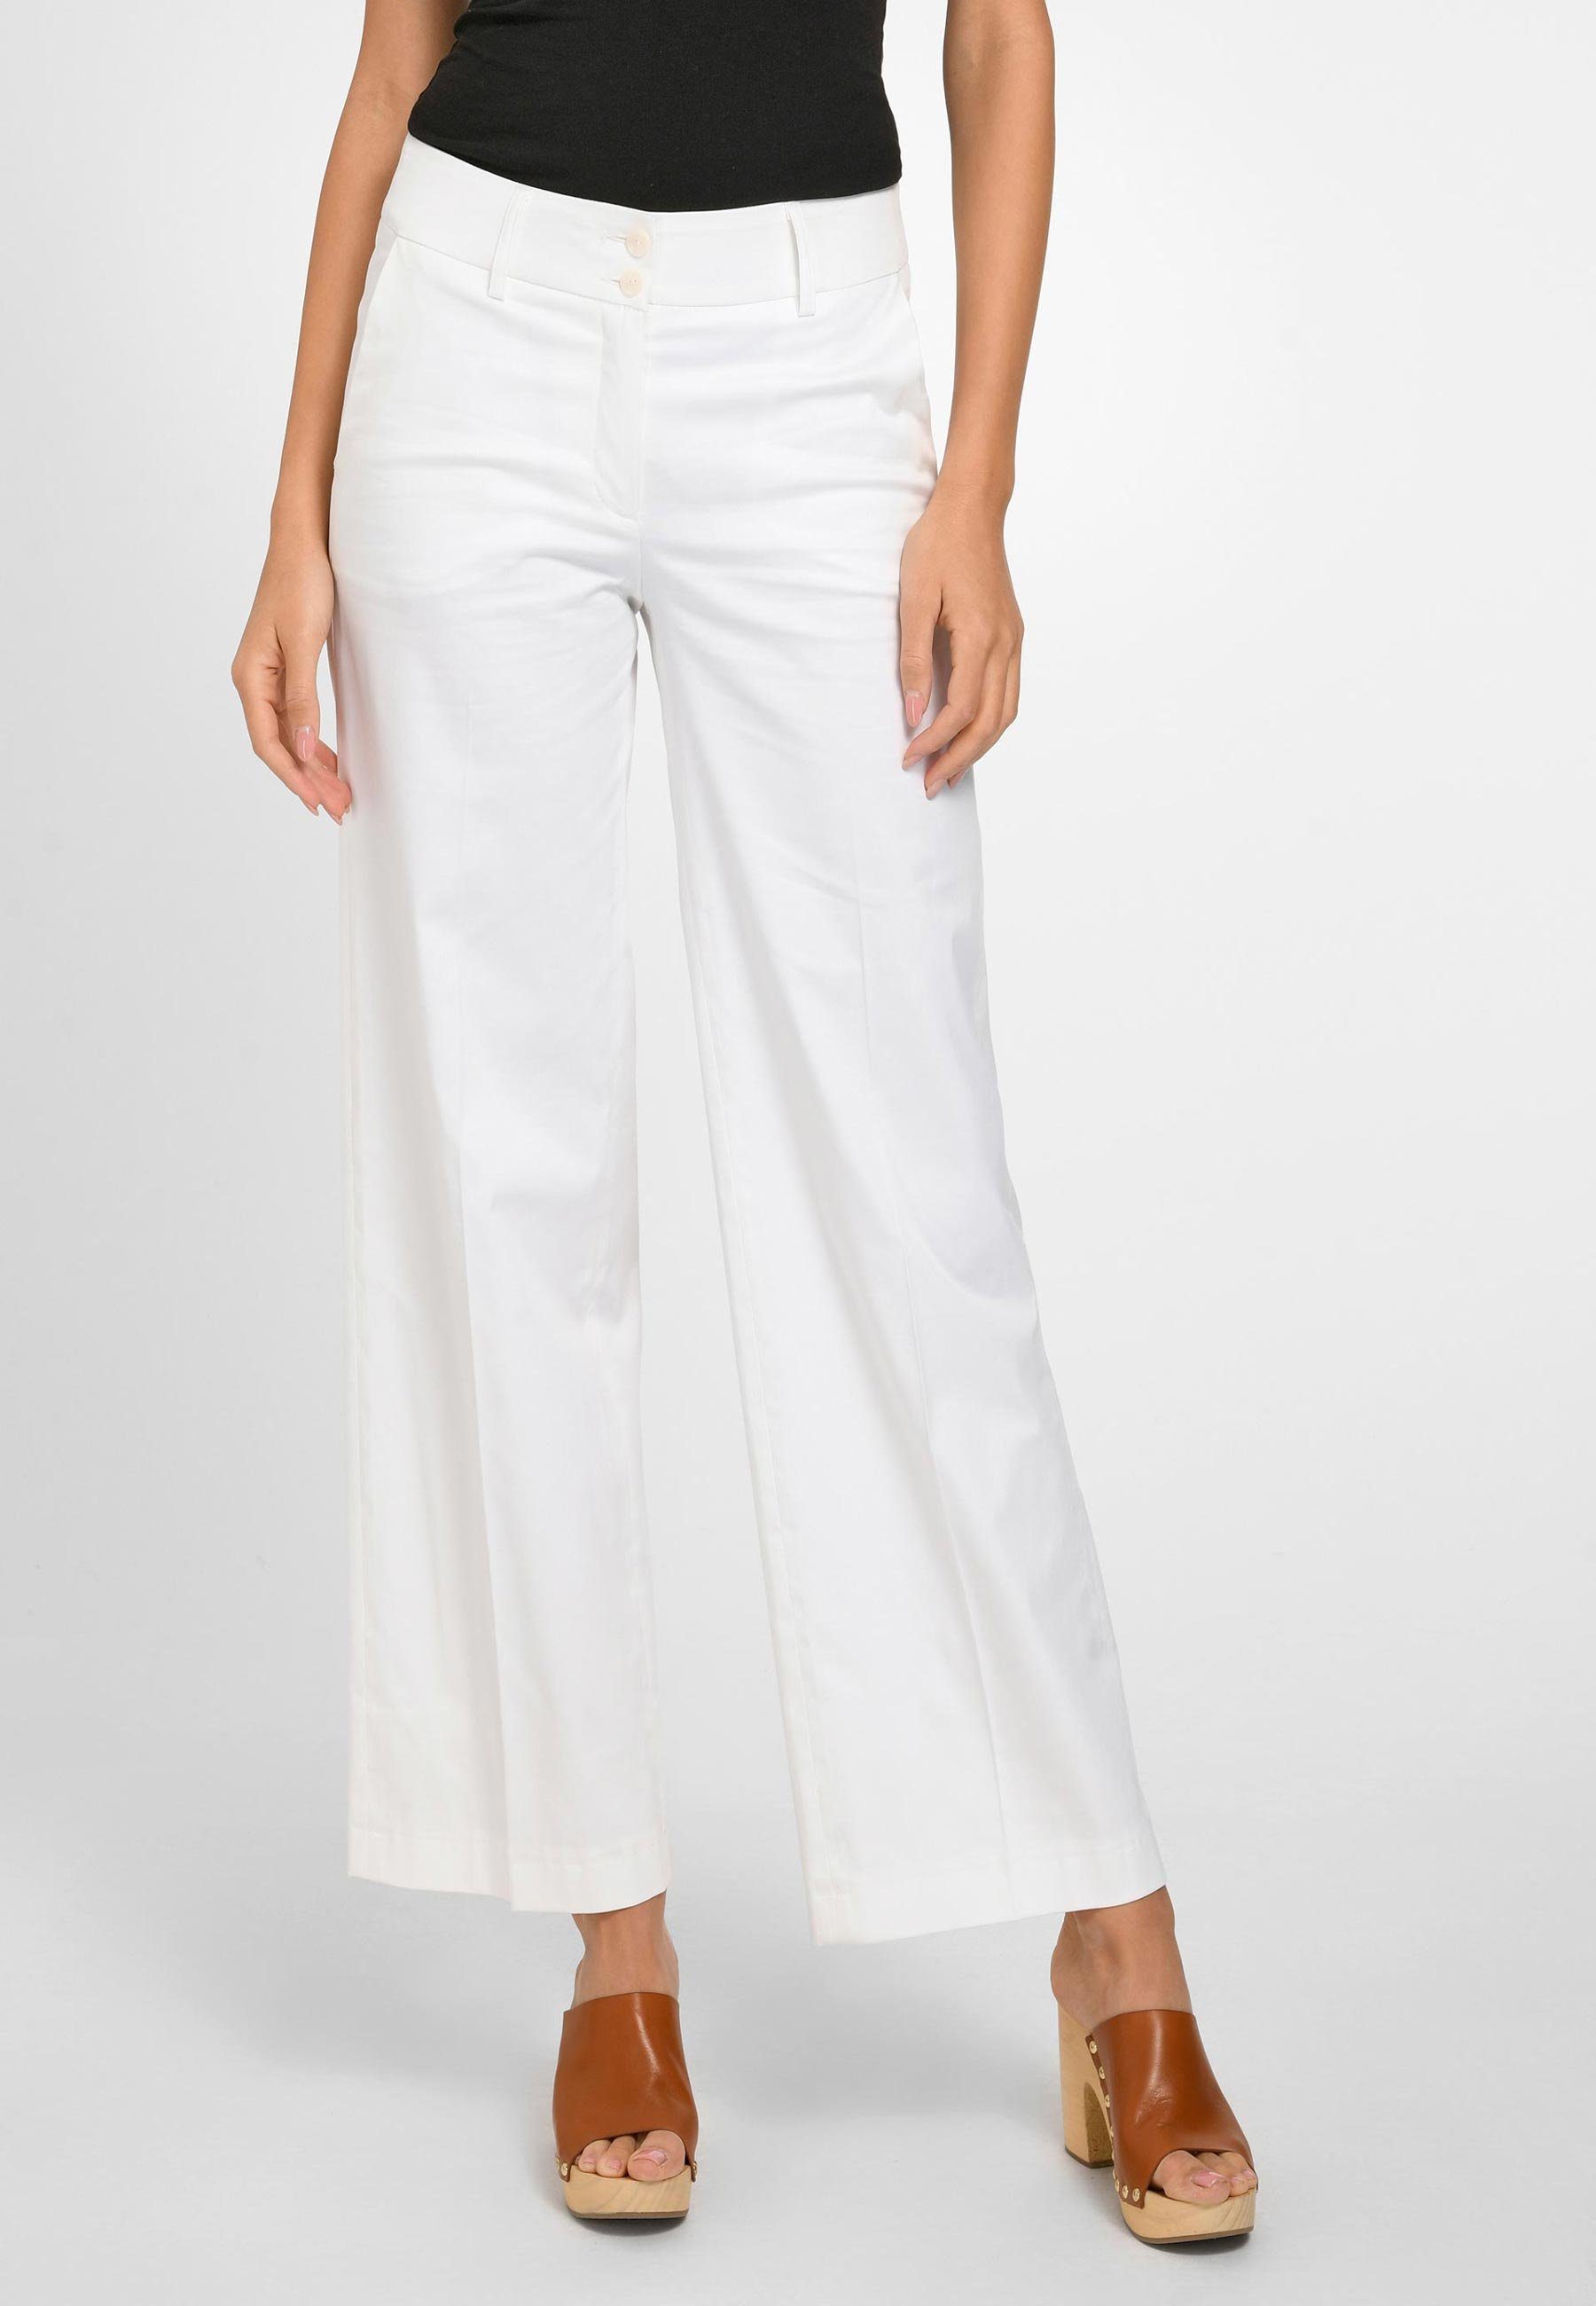 St. Emile Stoffhose Cotton weiss